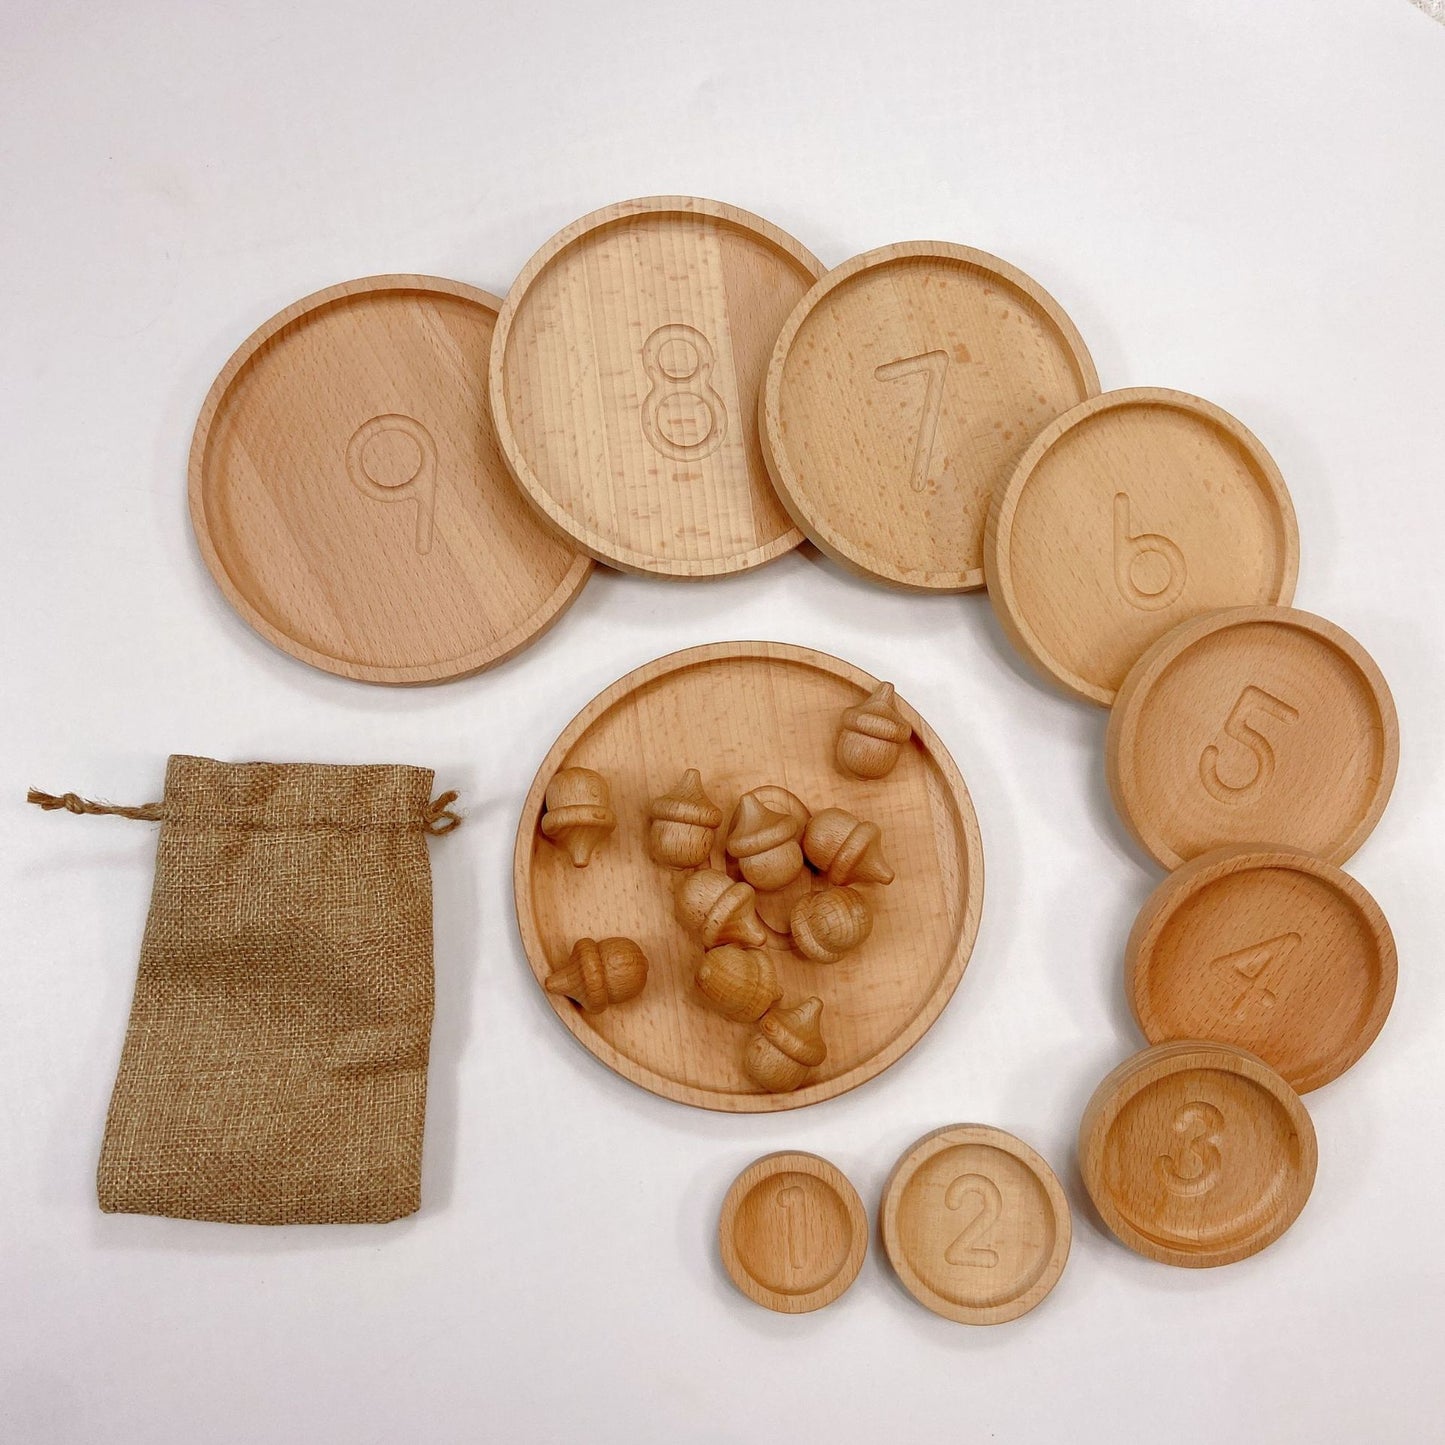 Wooden Montessori Number Counting Tray - HAPPY GUMNUT